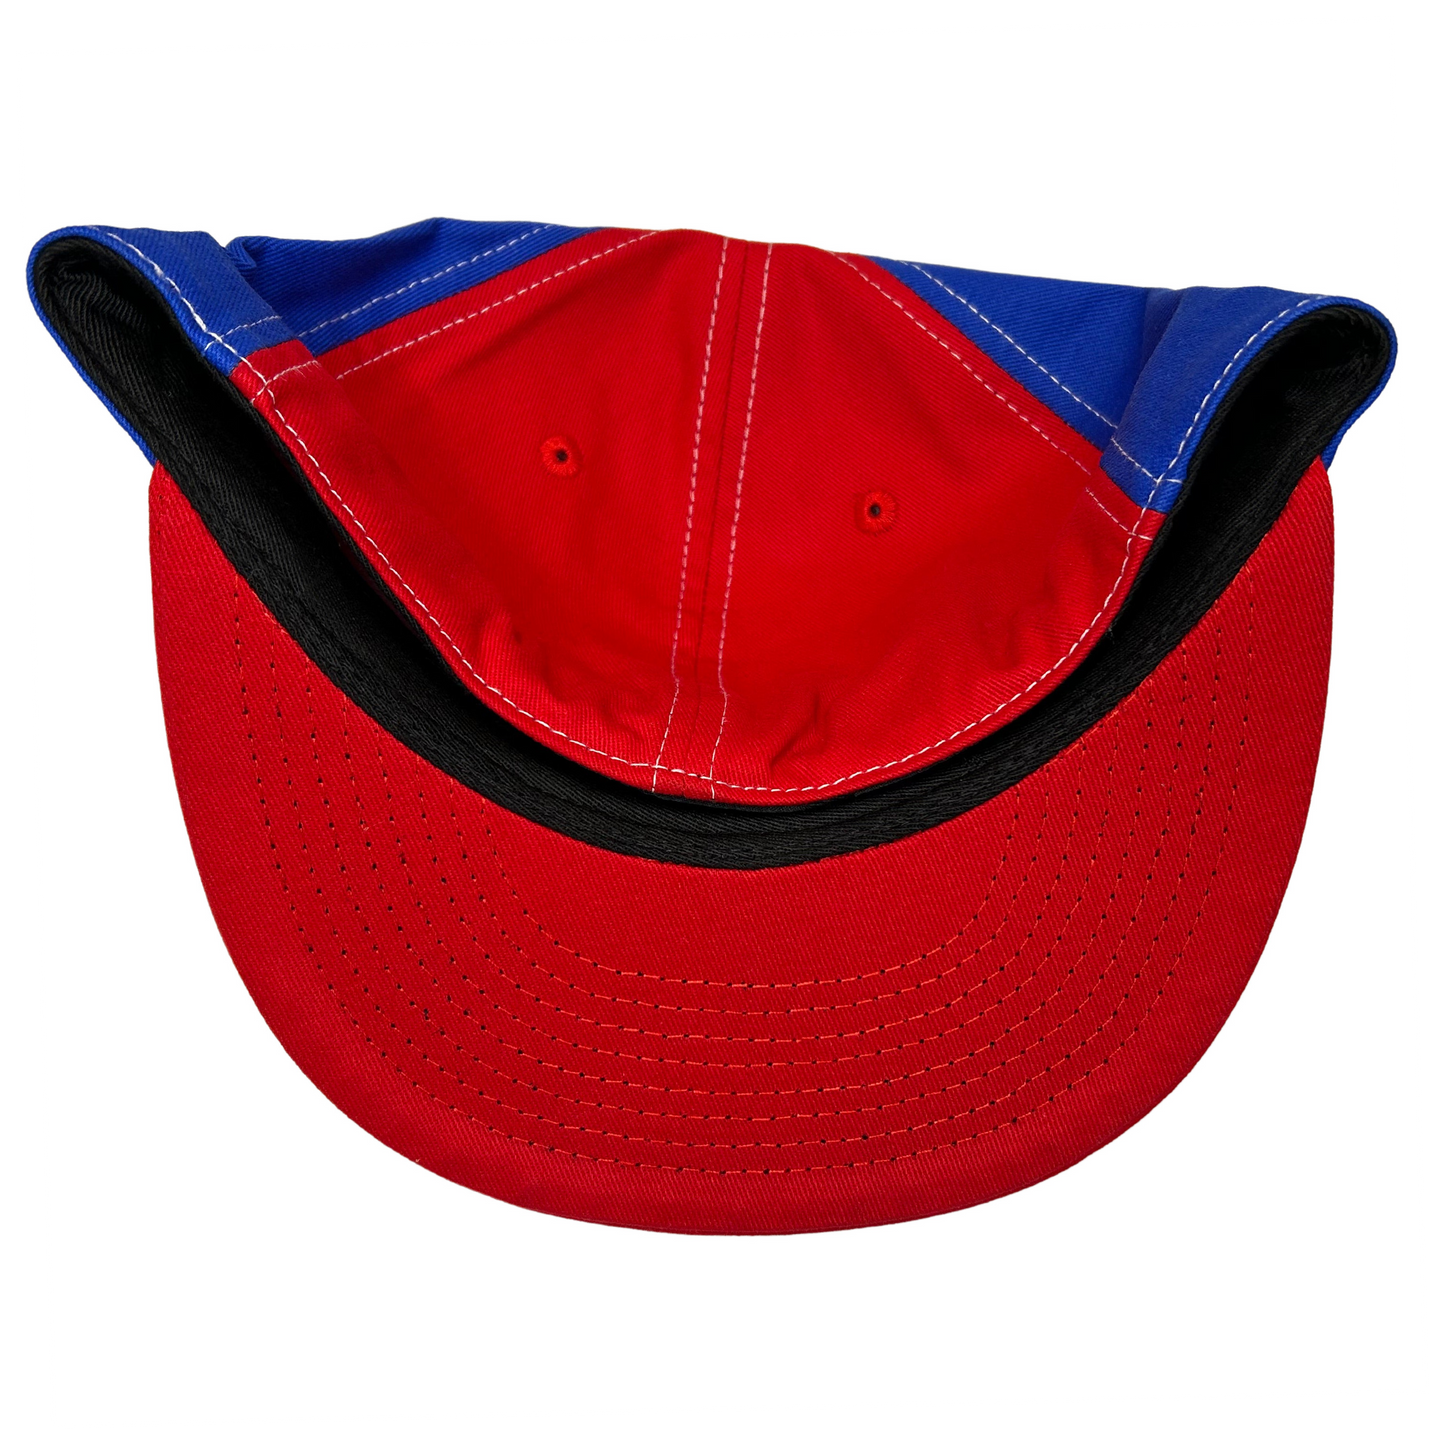 USA Fitted Hat